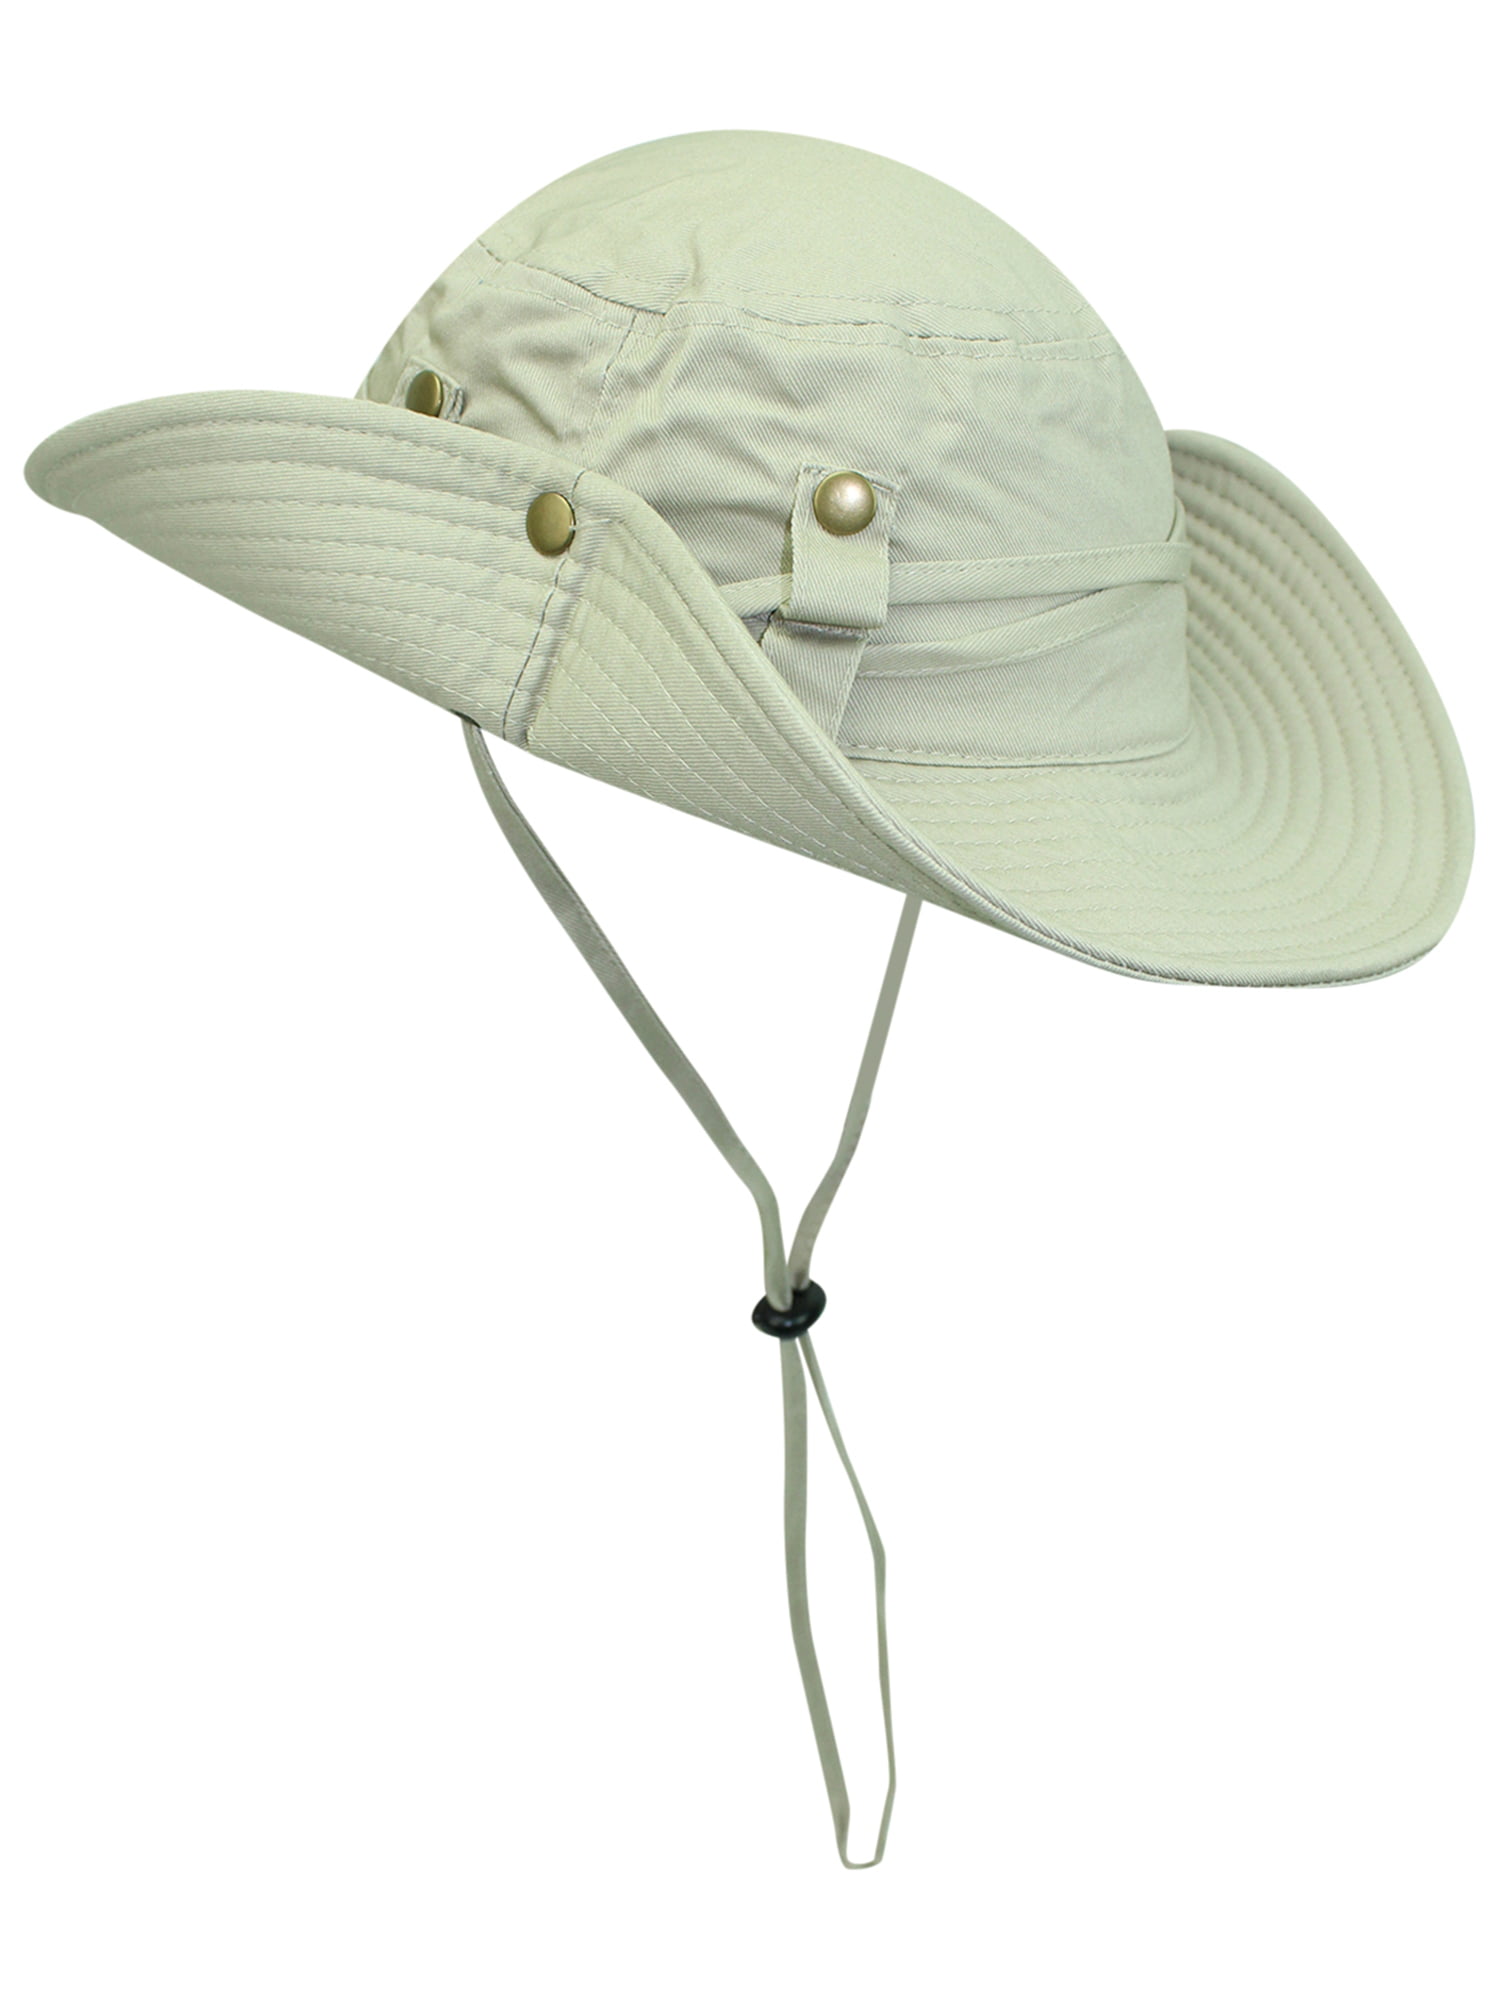 Green Safari Style Cotton Hat With Chin Cord & Side Snaps 